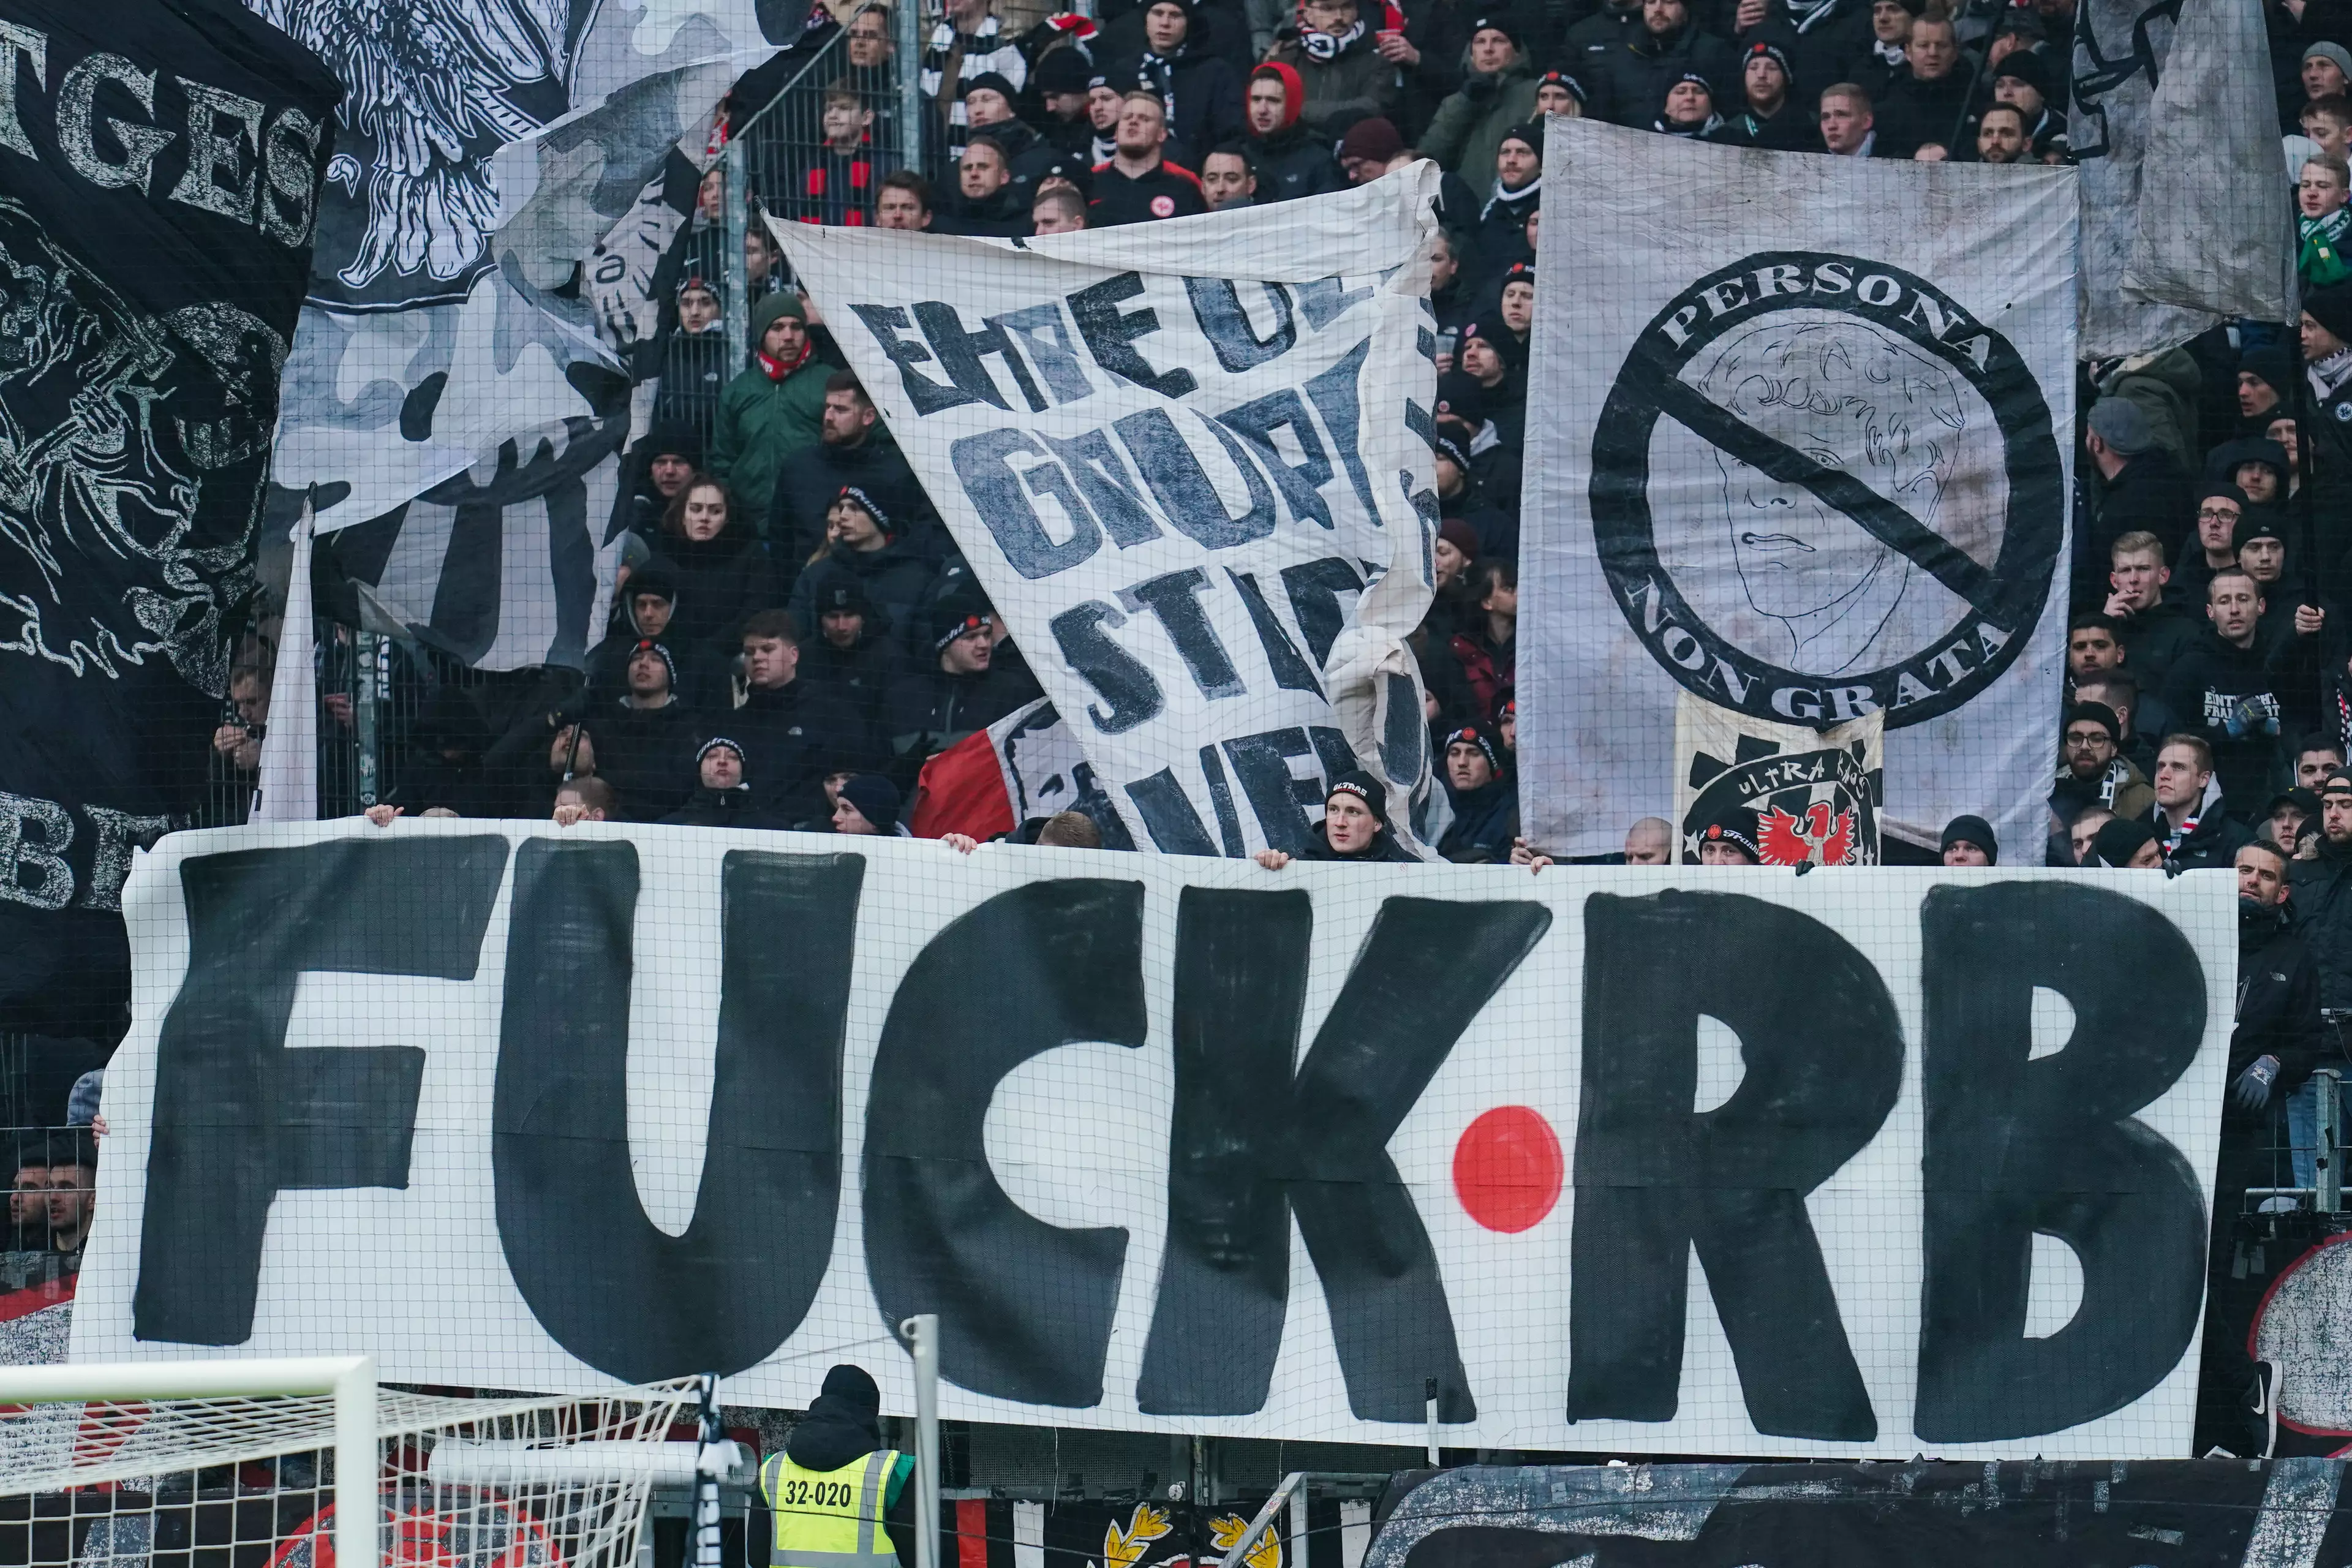 Fans in the Bundesliga have showed previously what they think of RB Leipzig. Image: PA Images